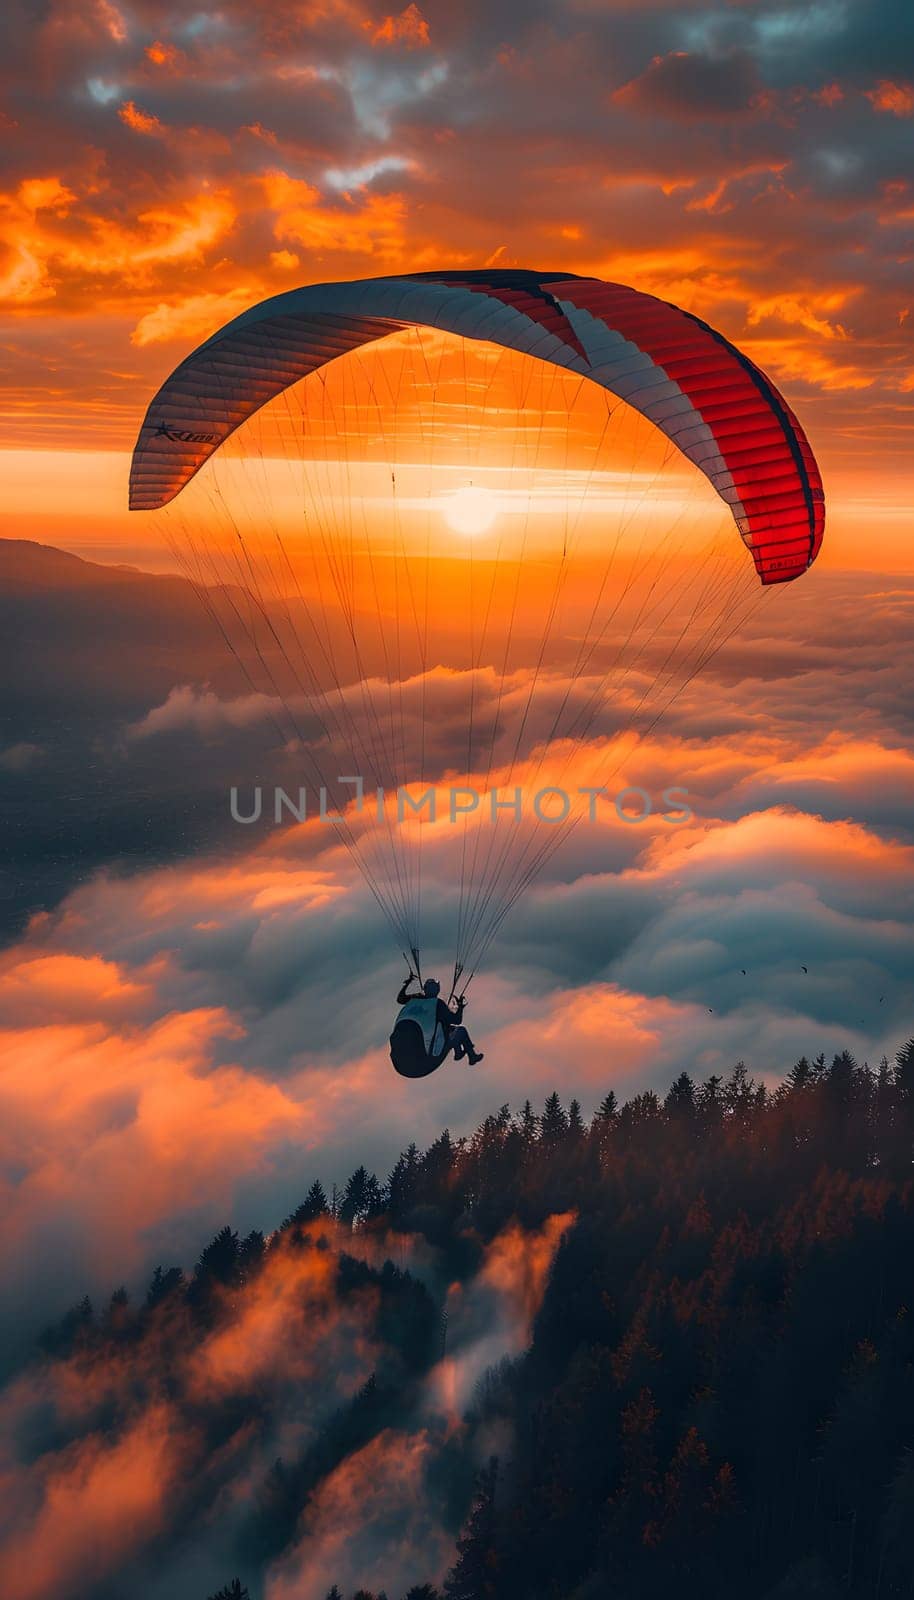 Parasailing at sunset over mountain, surrounded by orange sky and afterglow by Nadtochiy